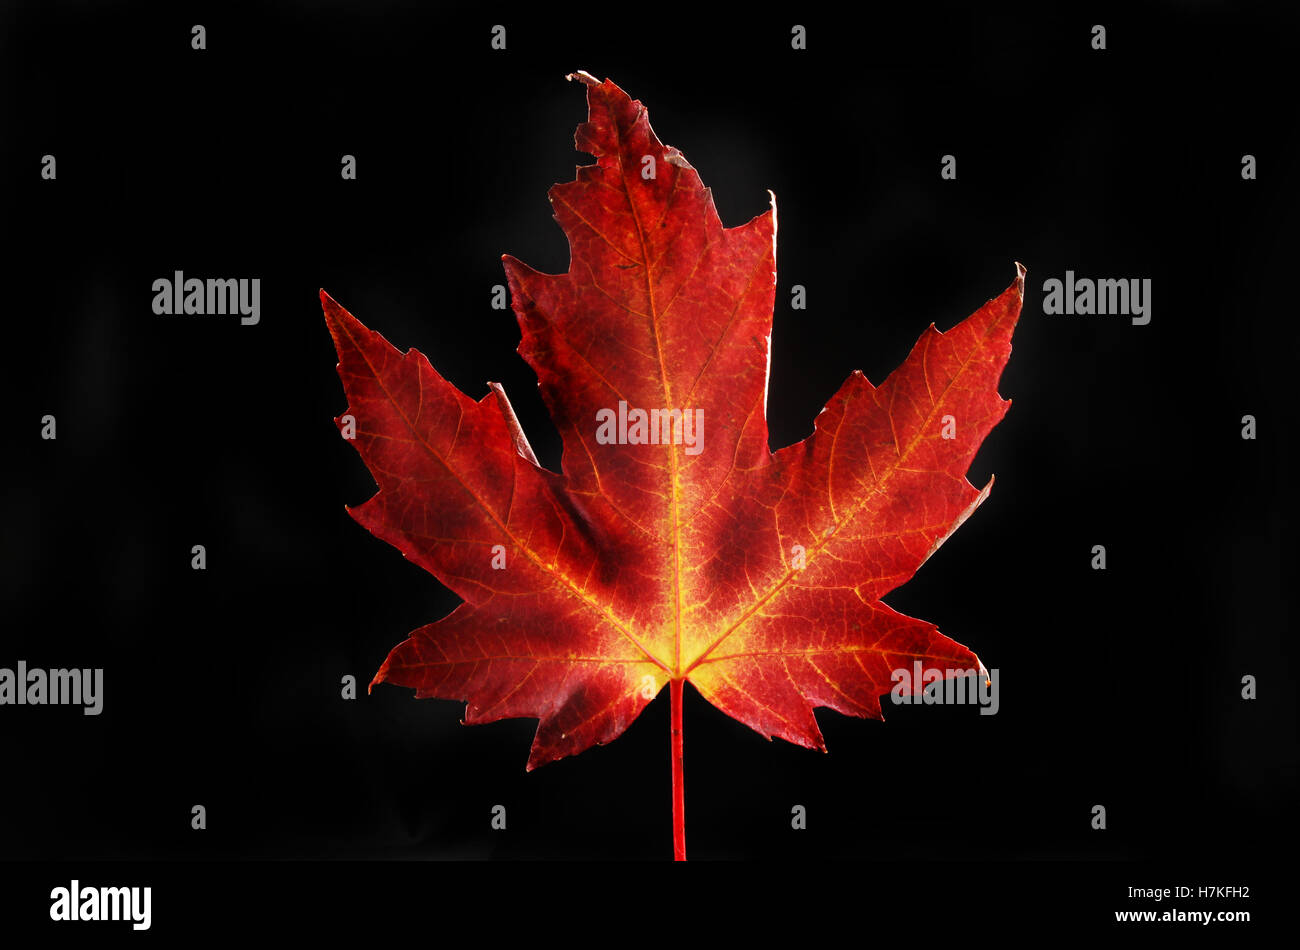 Autumn colours, reds and yellows in a maple leaf isolated against a black background Stock Photo